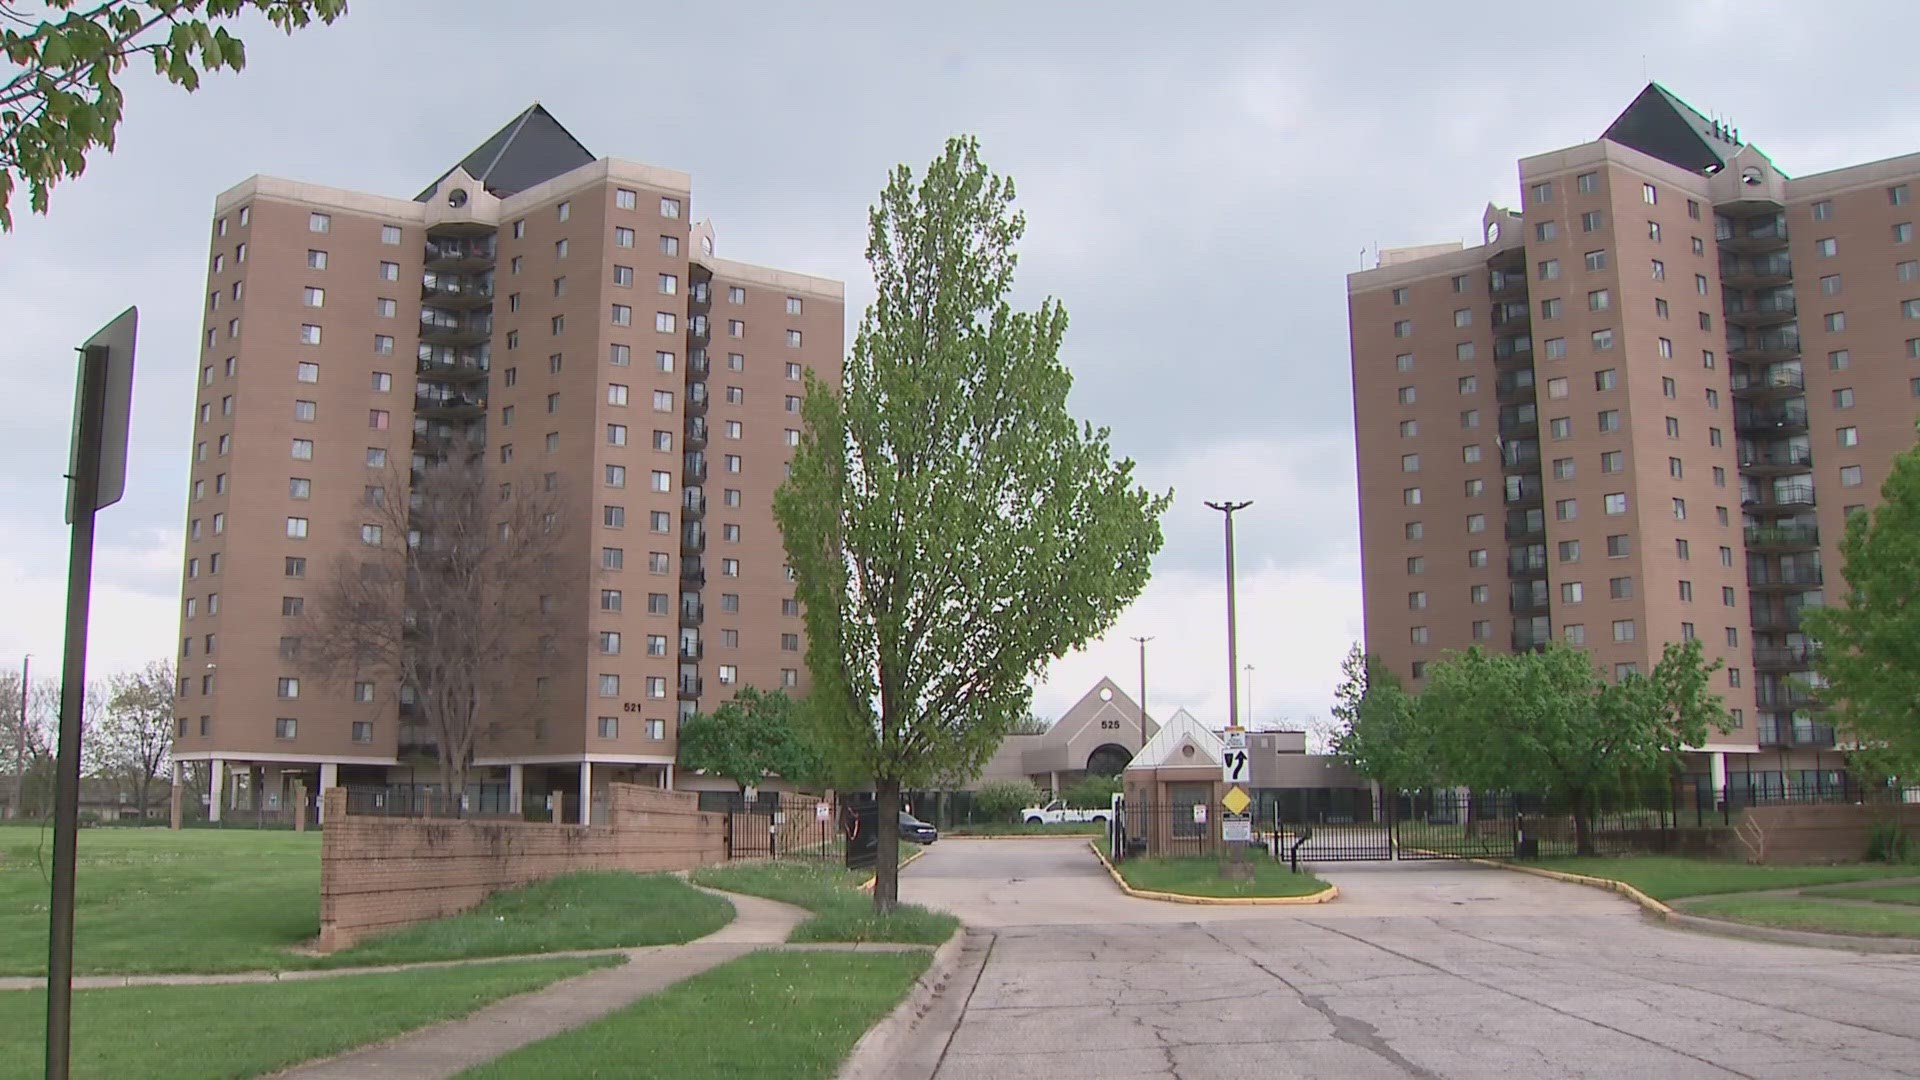 The city of Columbus condemned the apartment complex after the buildings were found to be without potable water, heat and a working fire suppression system.